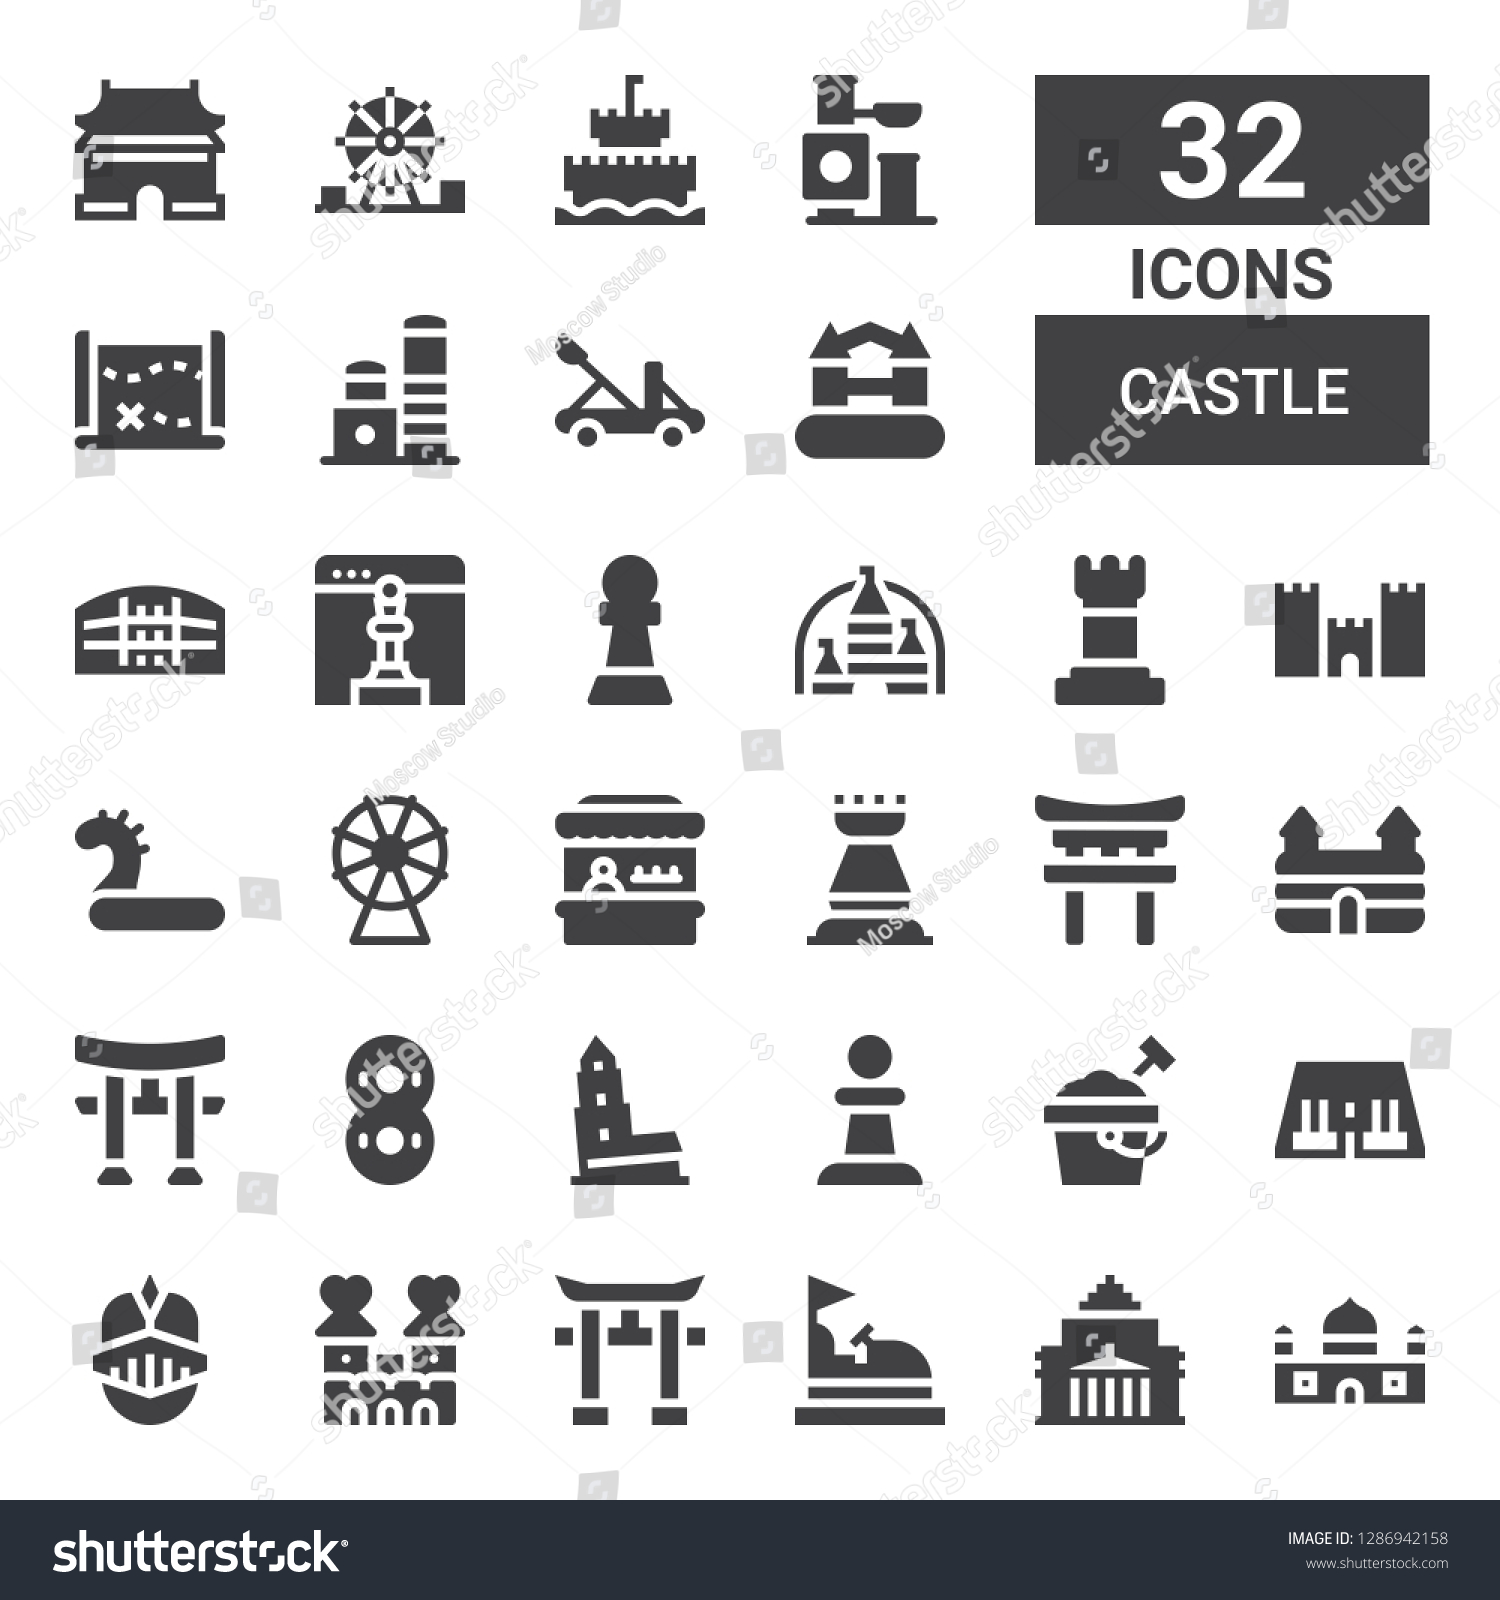 SVG of castle icon set. Collection of 32 filled castle icons included Castle, Shrine remembrance, Bumper car, Torii, Knight, Abu simbel, Sand bucket, Pawn, Nevyansk, Inflatable, Rook svg